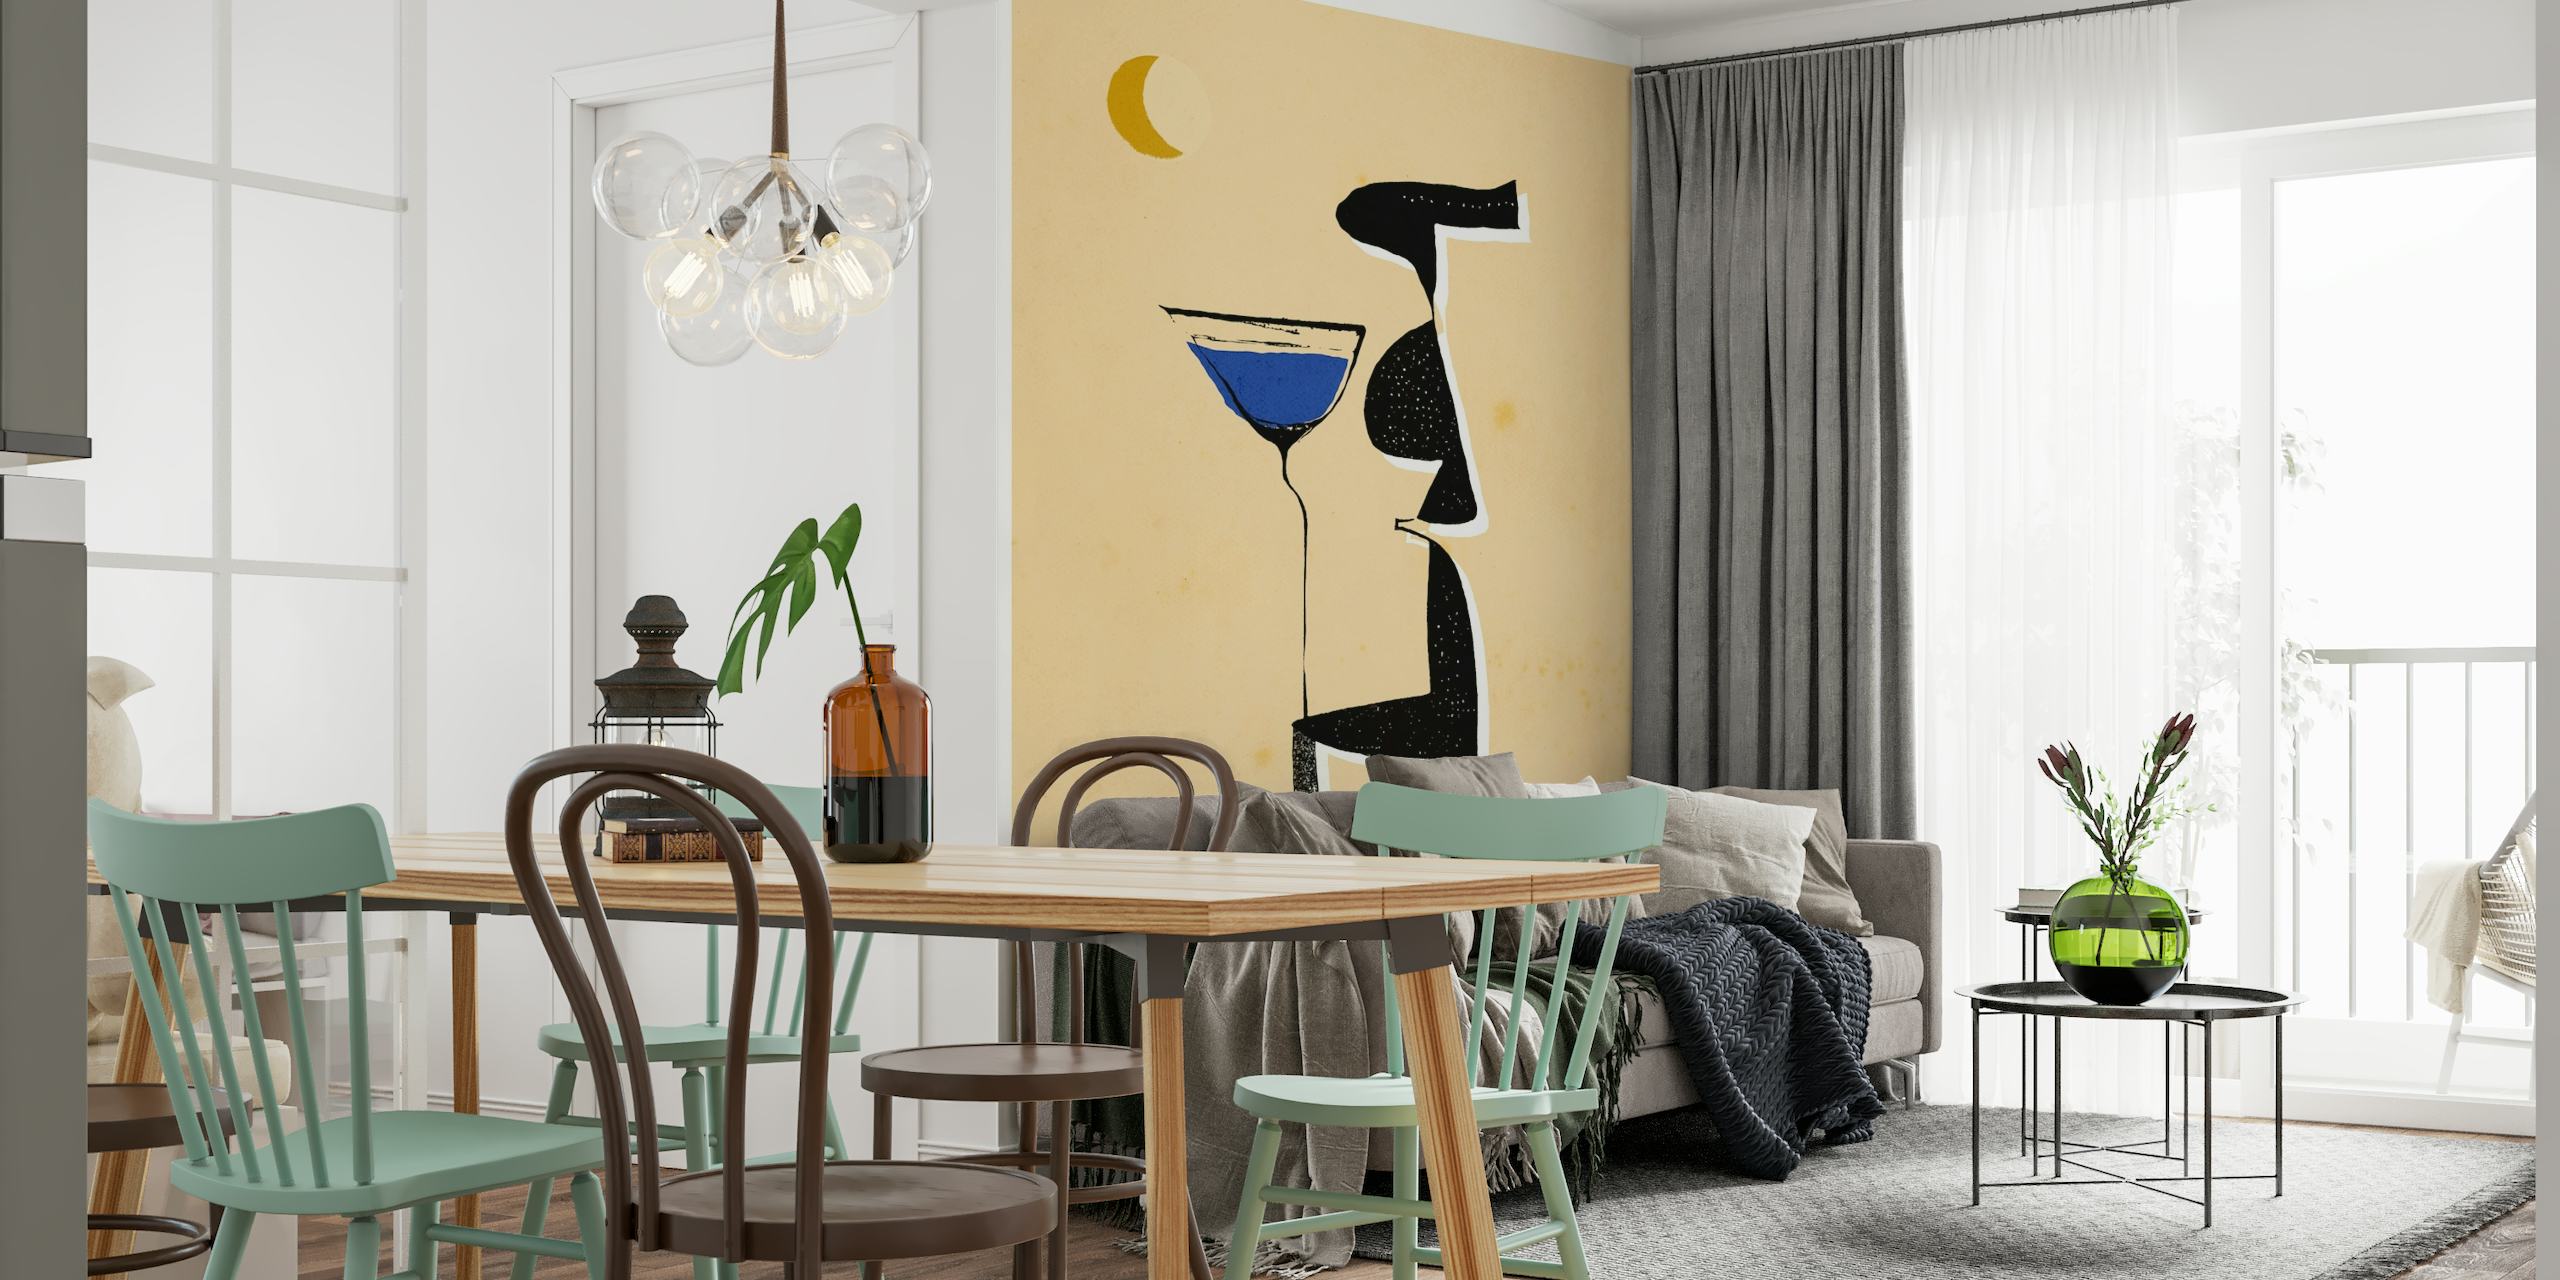 Le Monsieur abstract figure wall mural with warm tones, blue accent, and crescent moon.